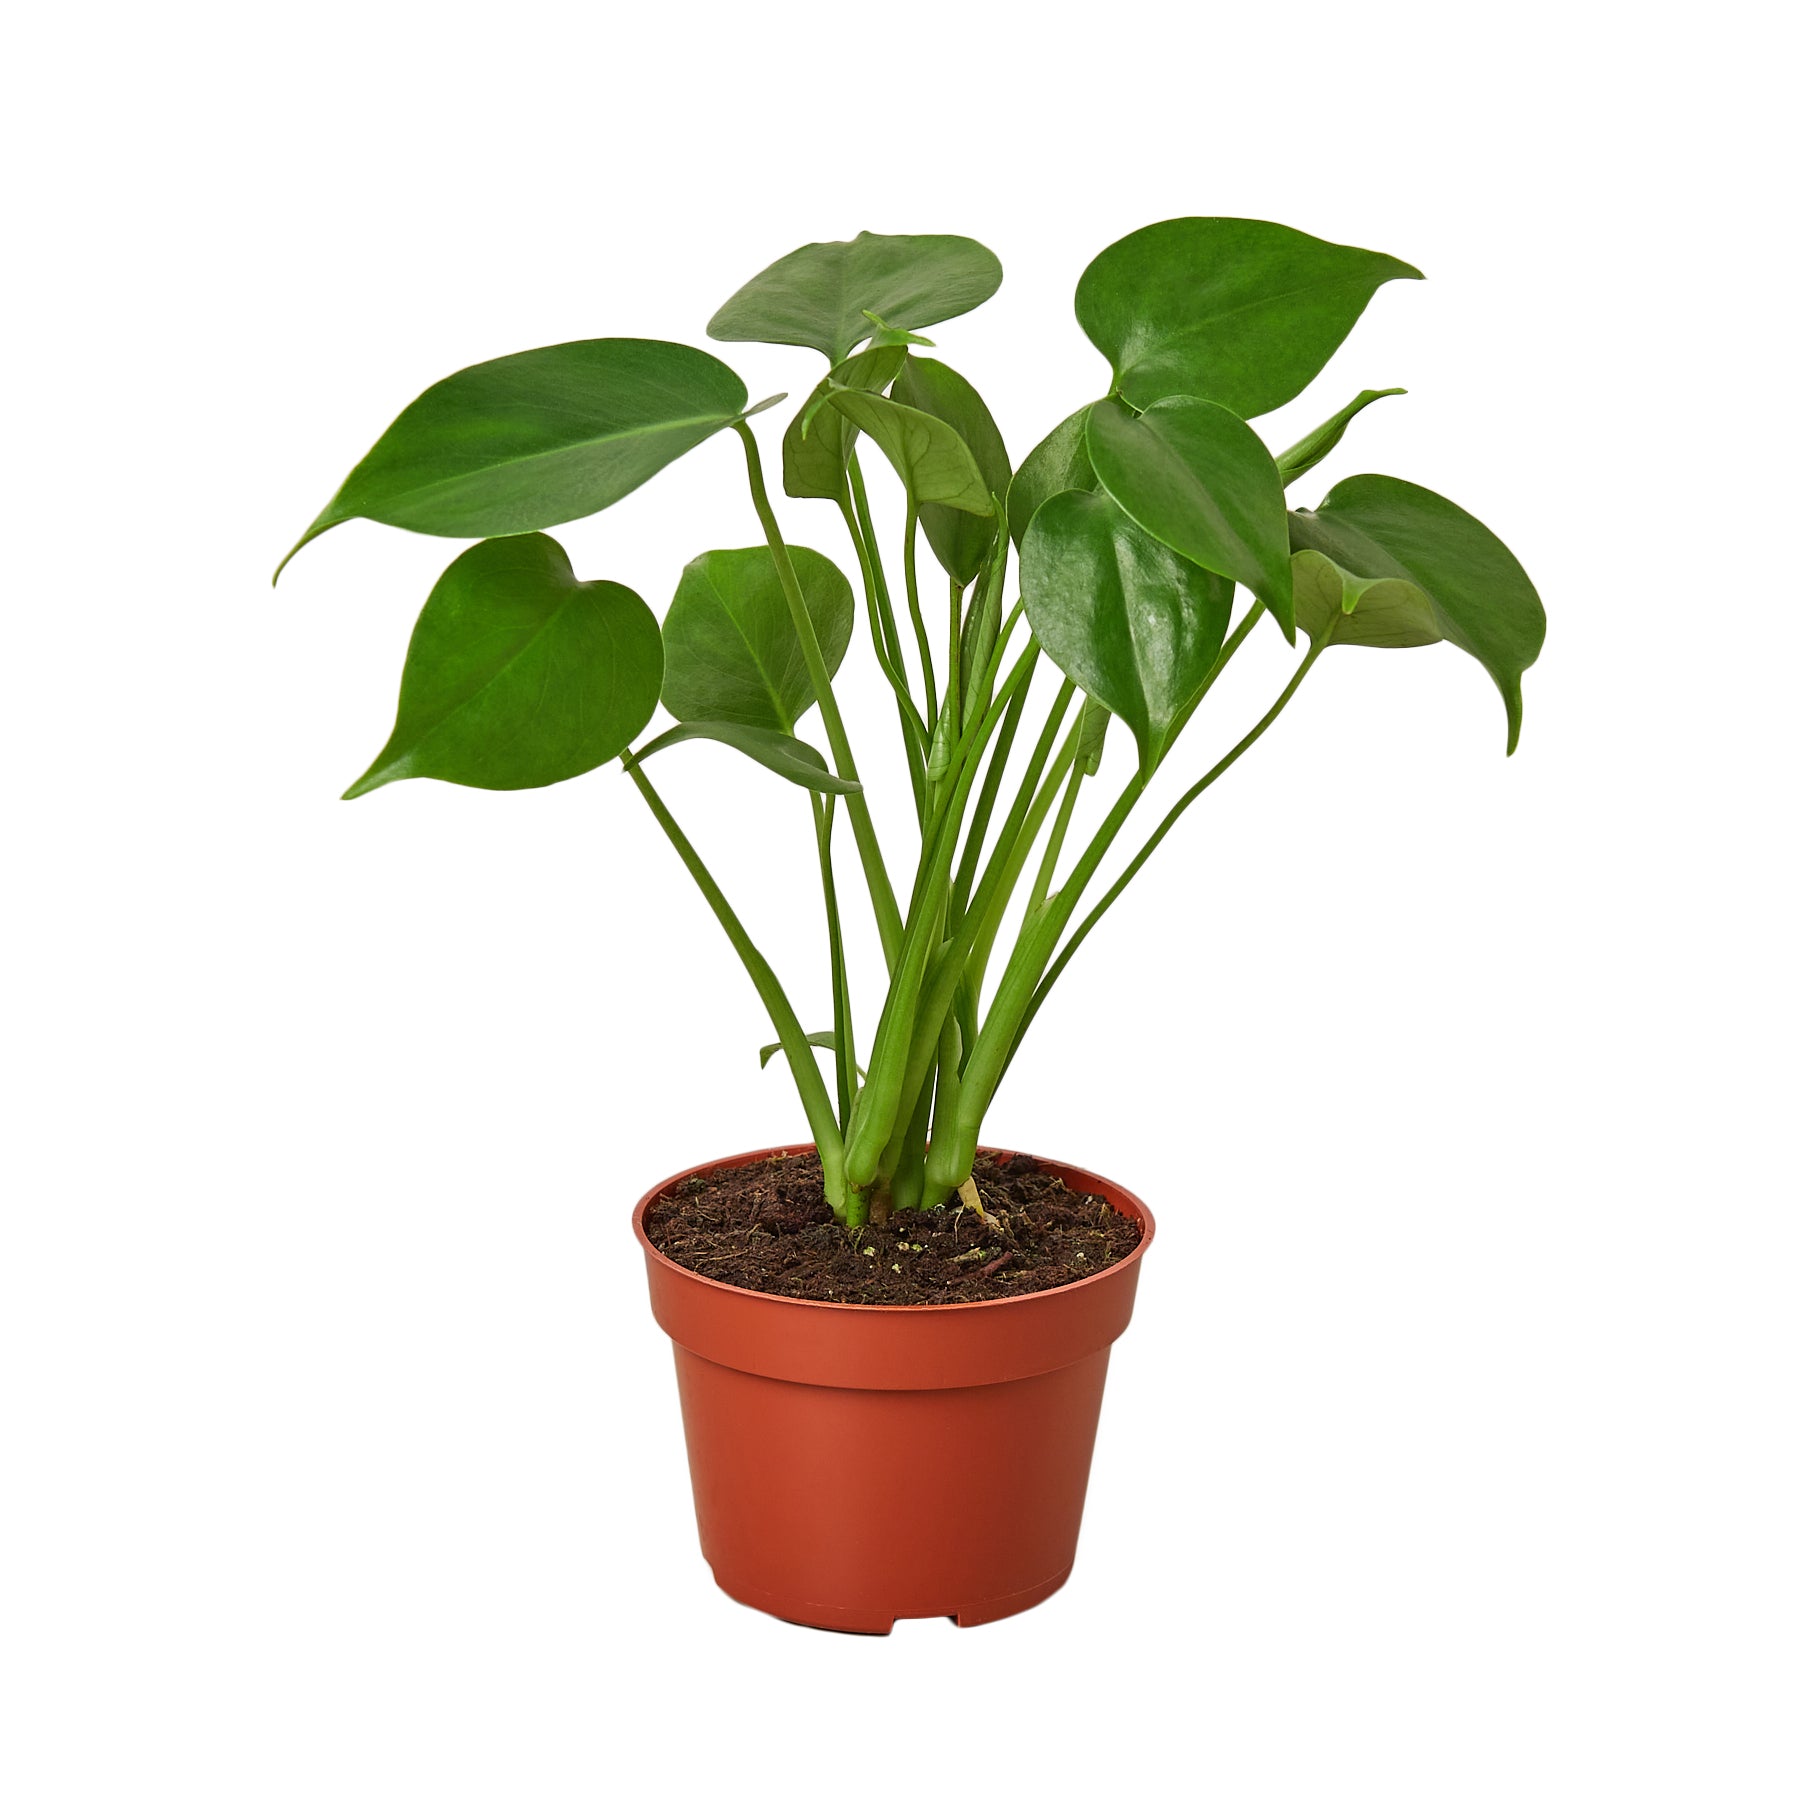 A small plant in a pot on a white background from the best plant nursery near me.